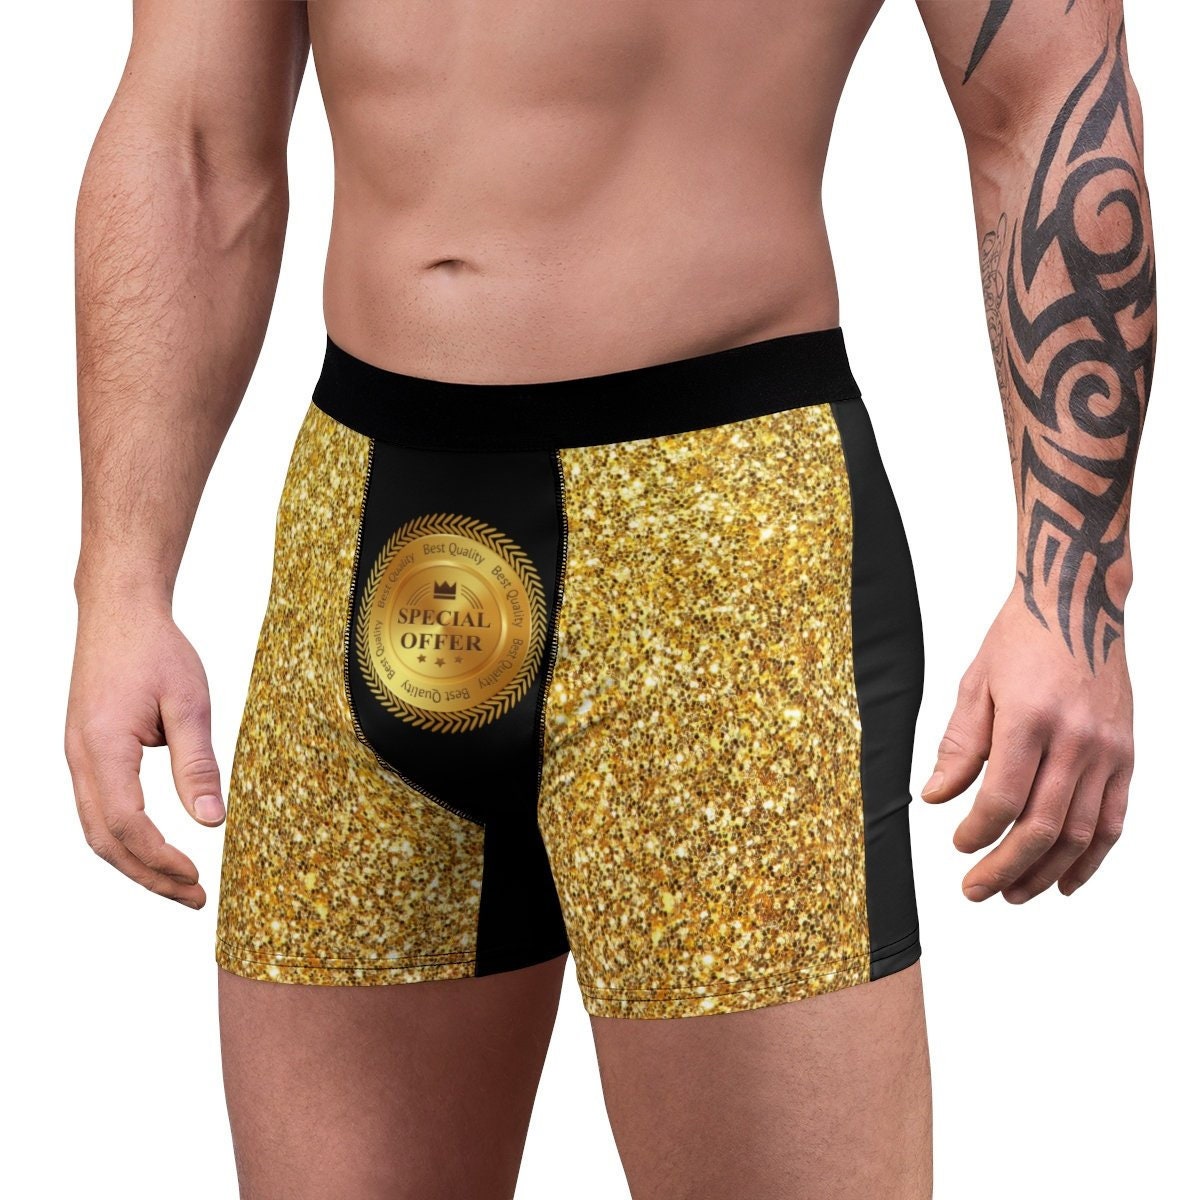 Men's Boxer Briefs Special Offer Best Quality Royal Choice Golden Sand  Black Classic Gift King Size Stamp Great Seal Funny Gag Present Joke 